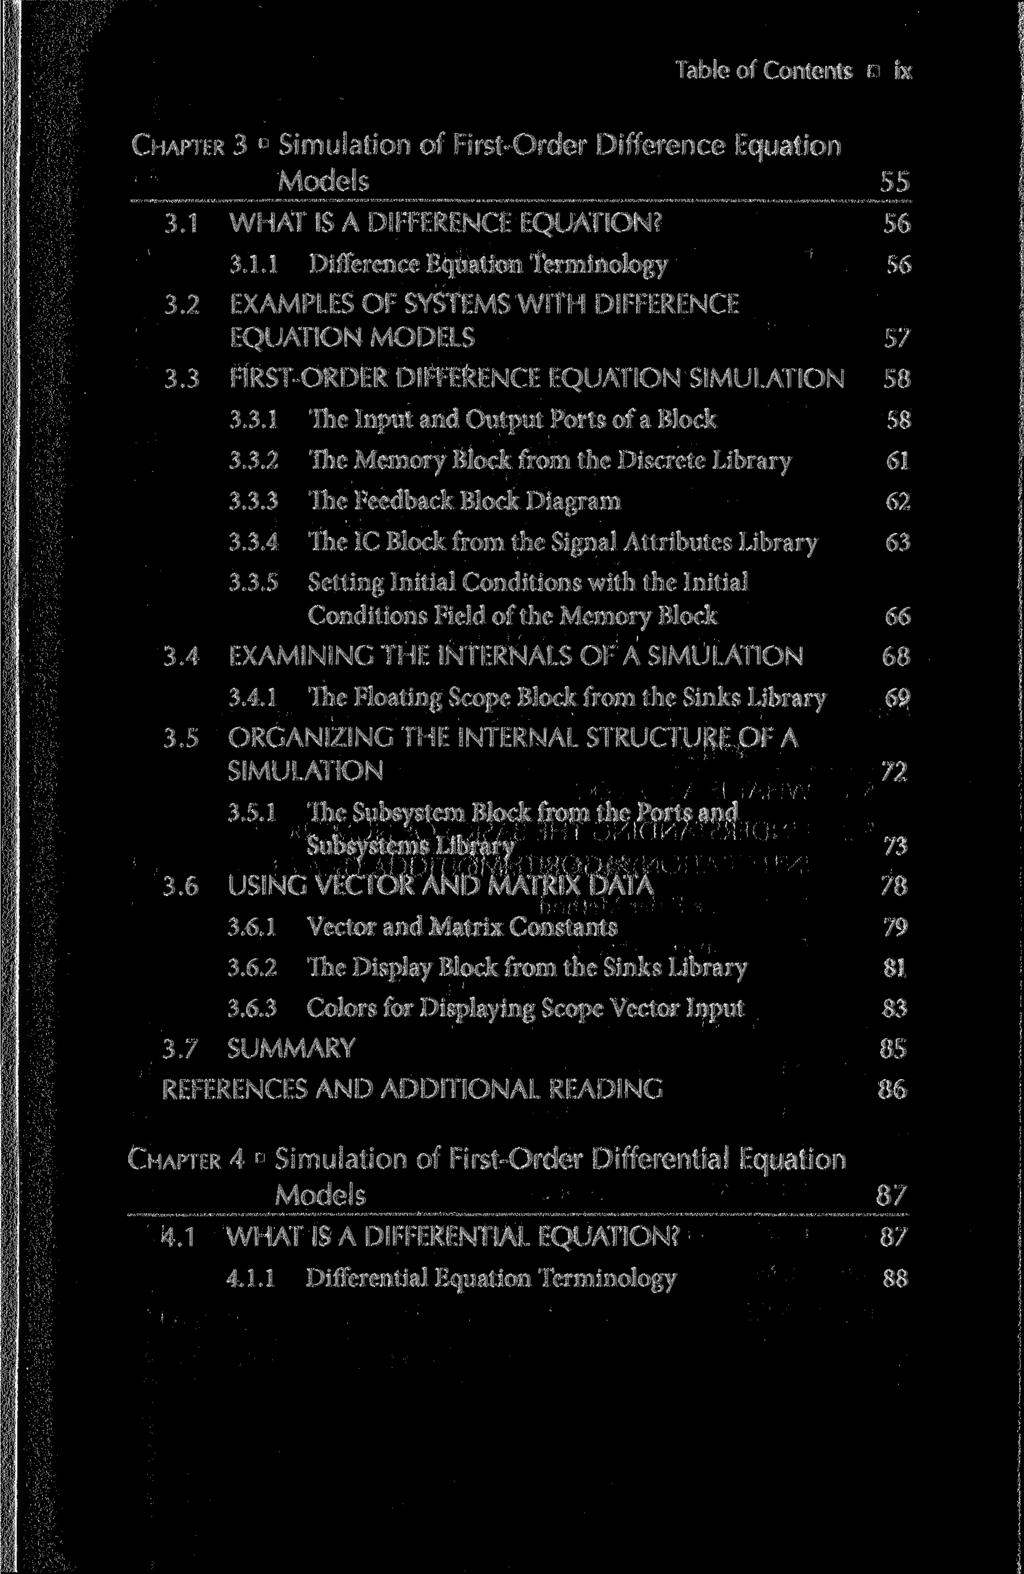 Table of Contents ix CHAPTER 3 Simulation of First-Order Difference Equation Models 55 3.1 WHAT IS A DIFFERENCE EQUATION? 56 3.1.1 Difference Equation Terminology 56 3.